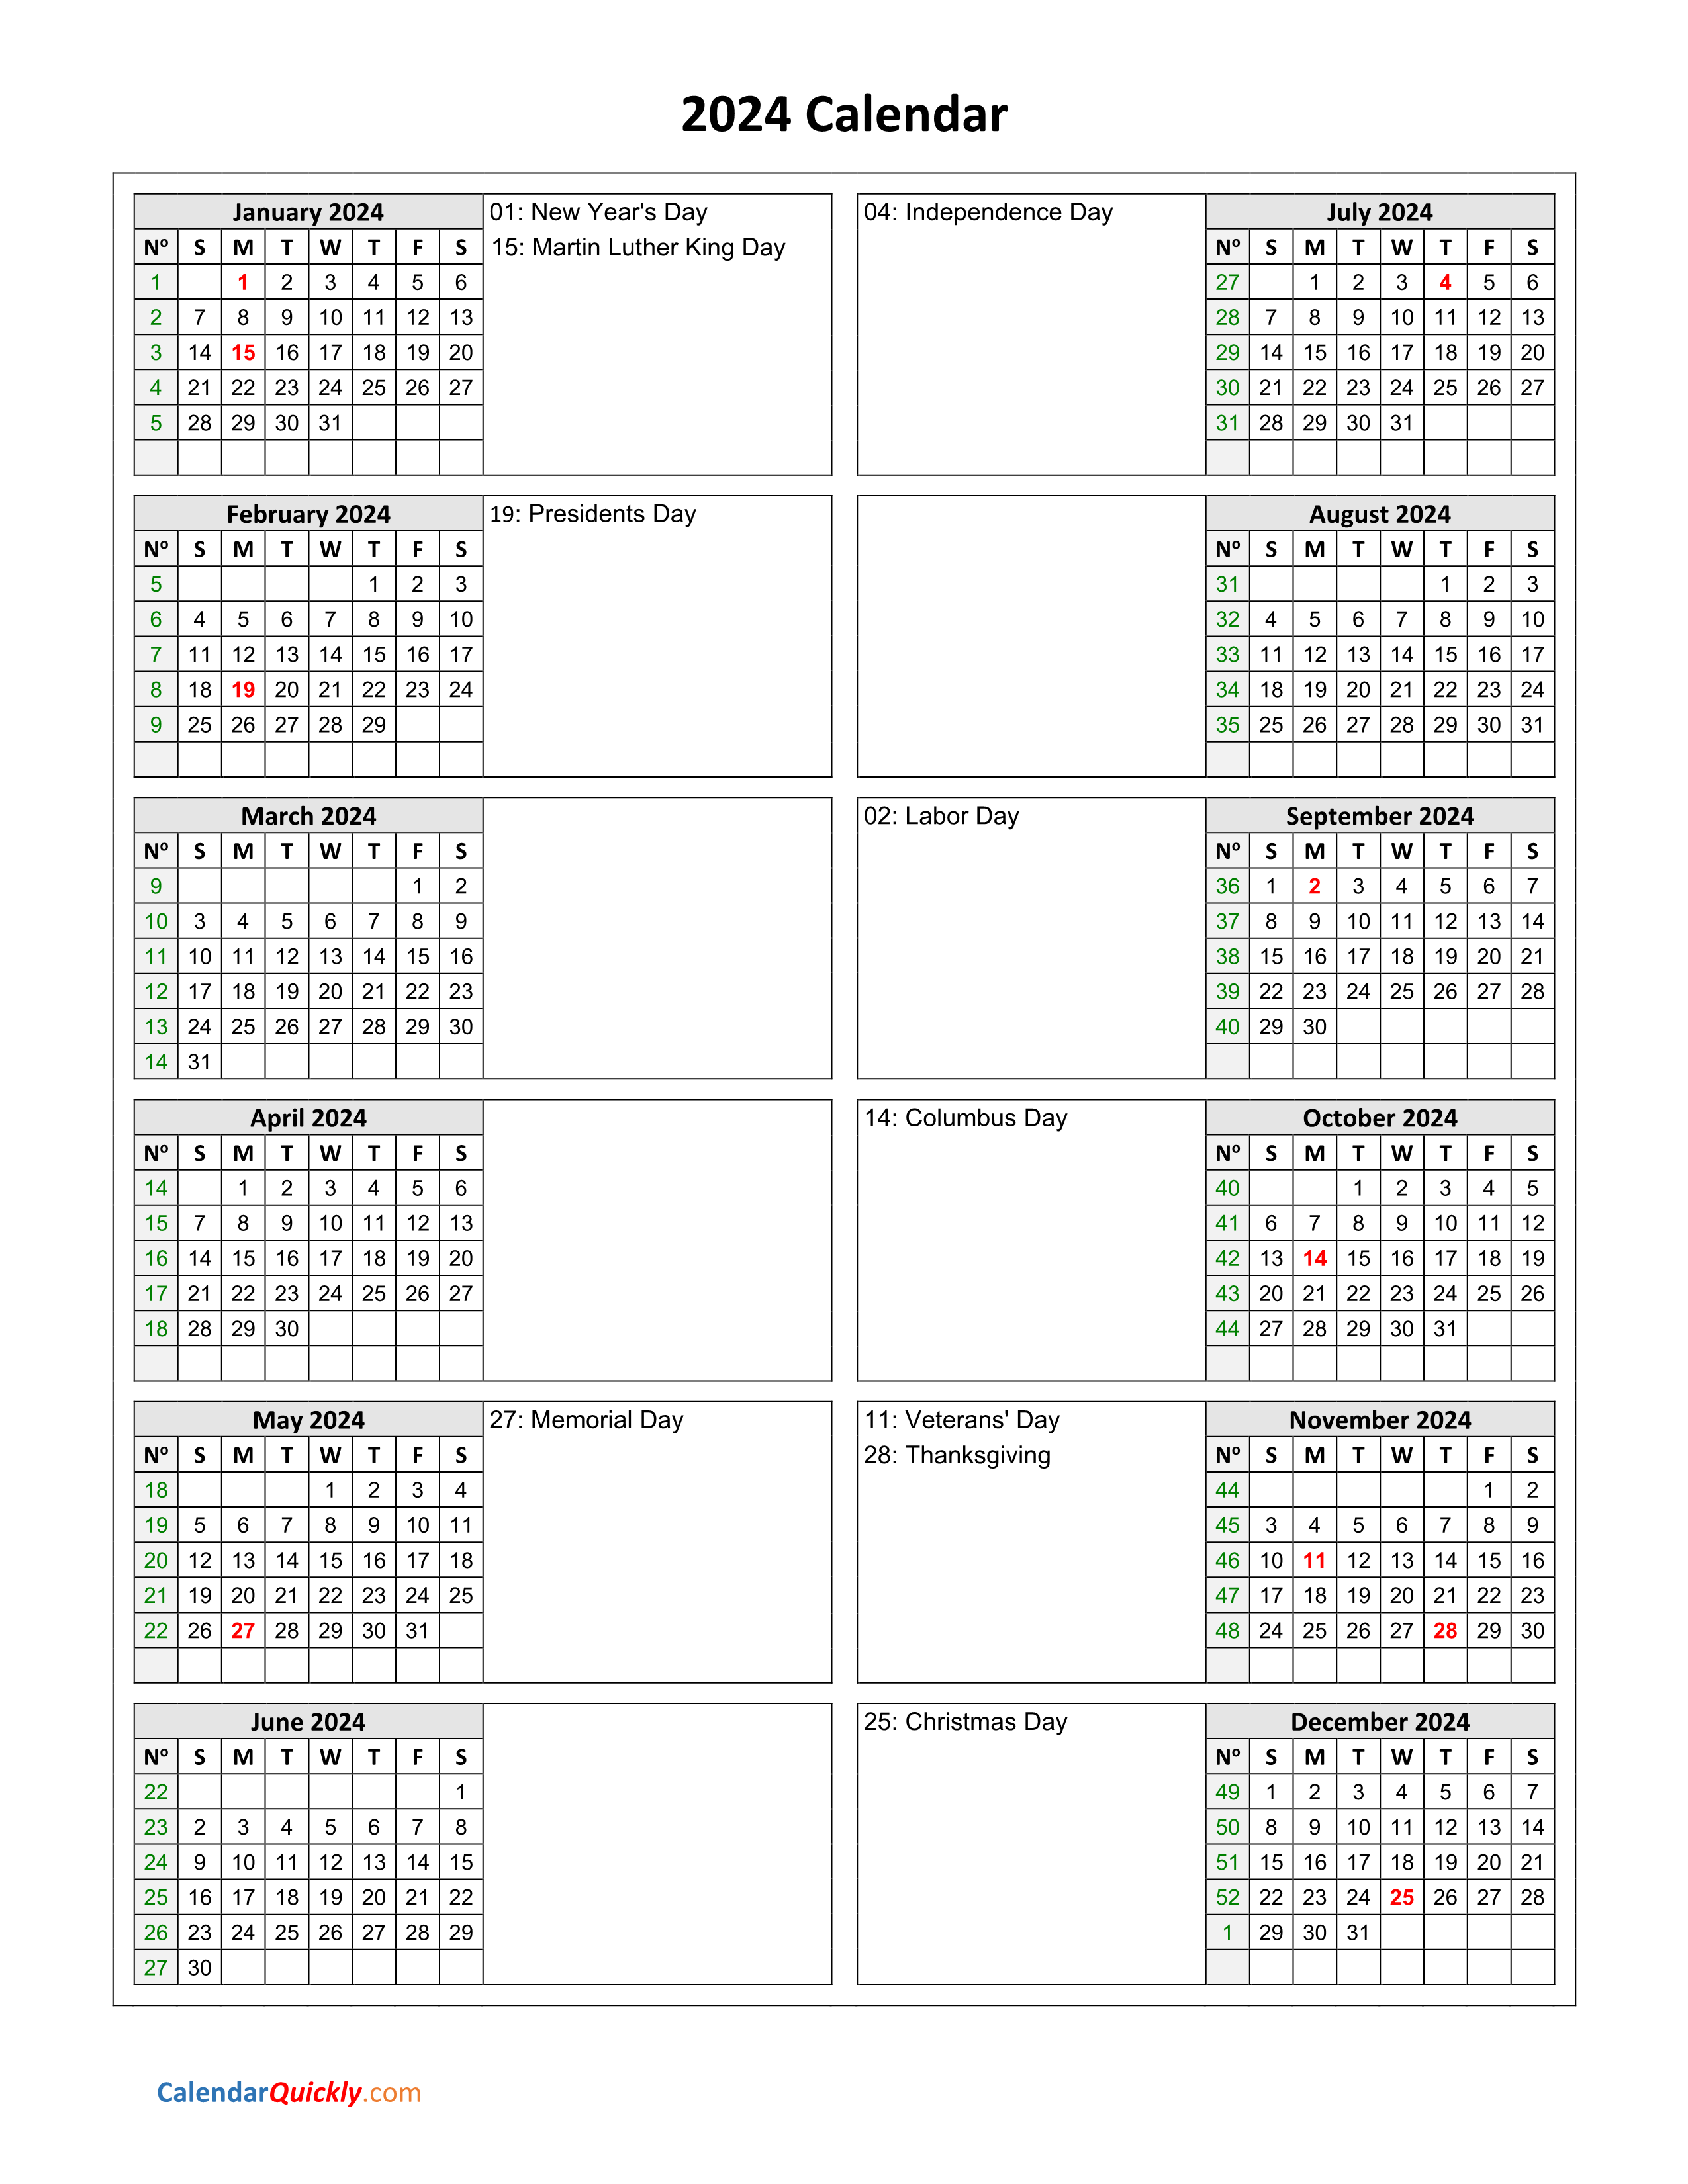 Printable Calendars 2024 Pdf Calendar 2024 With Federal Holidays - Free Printable 2024 Calendar With Holidays On One Page